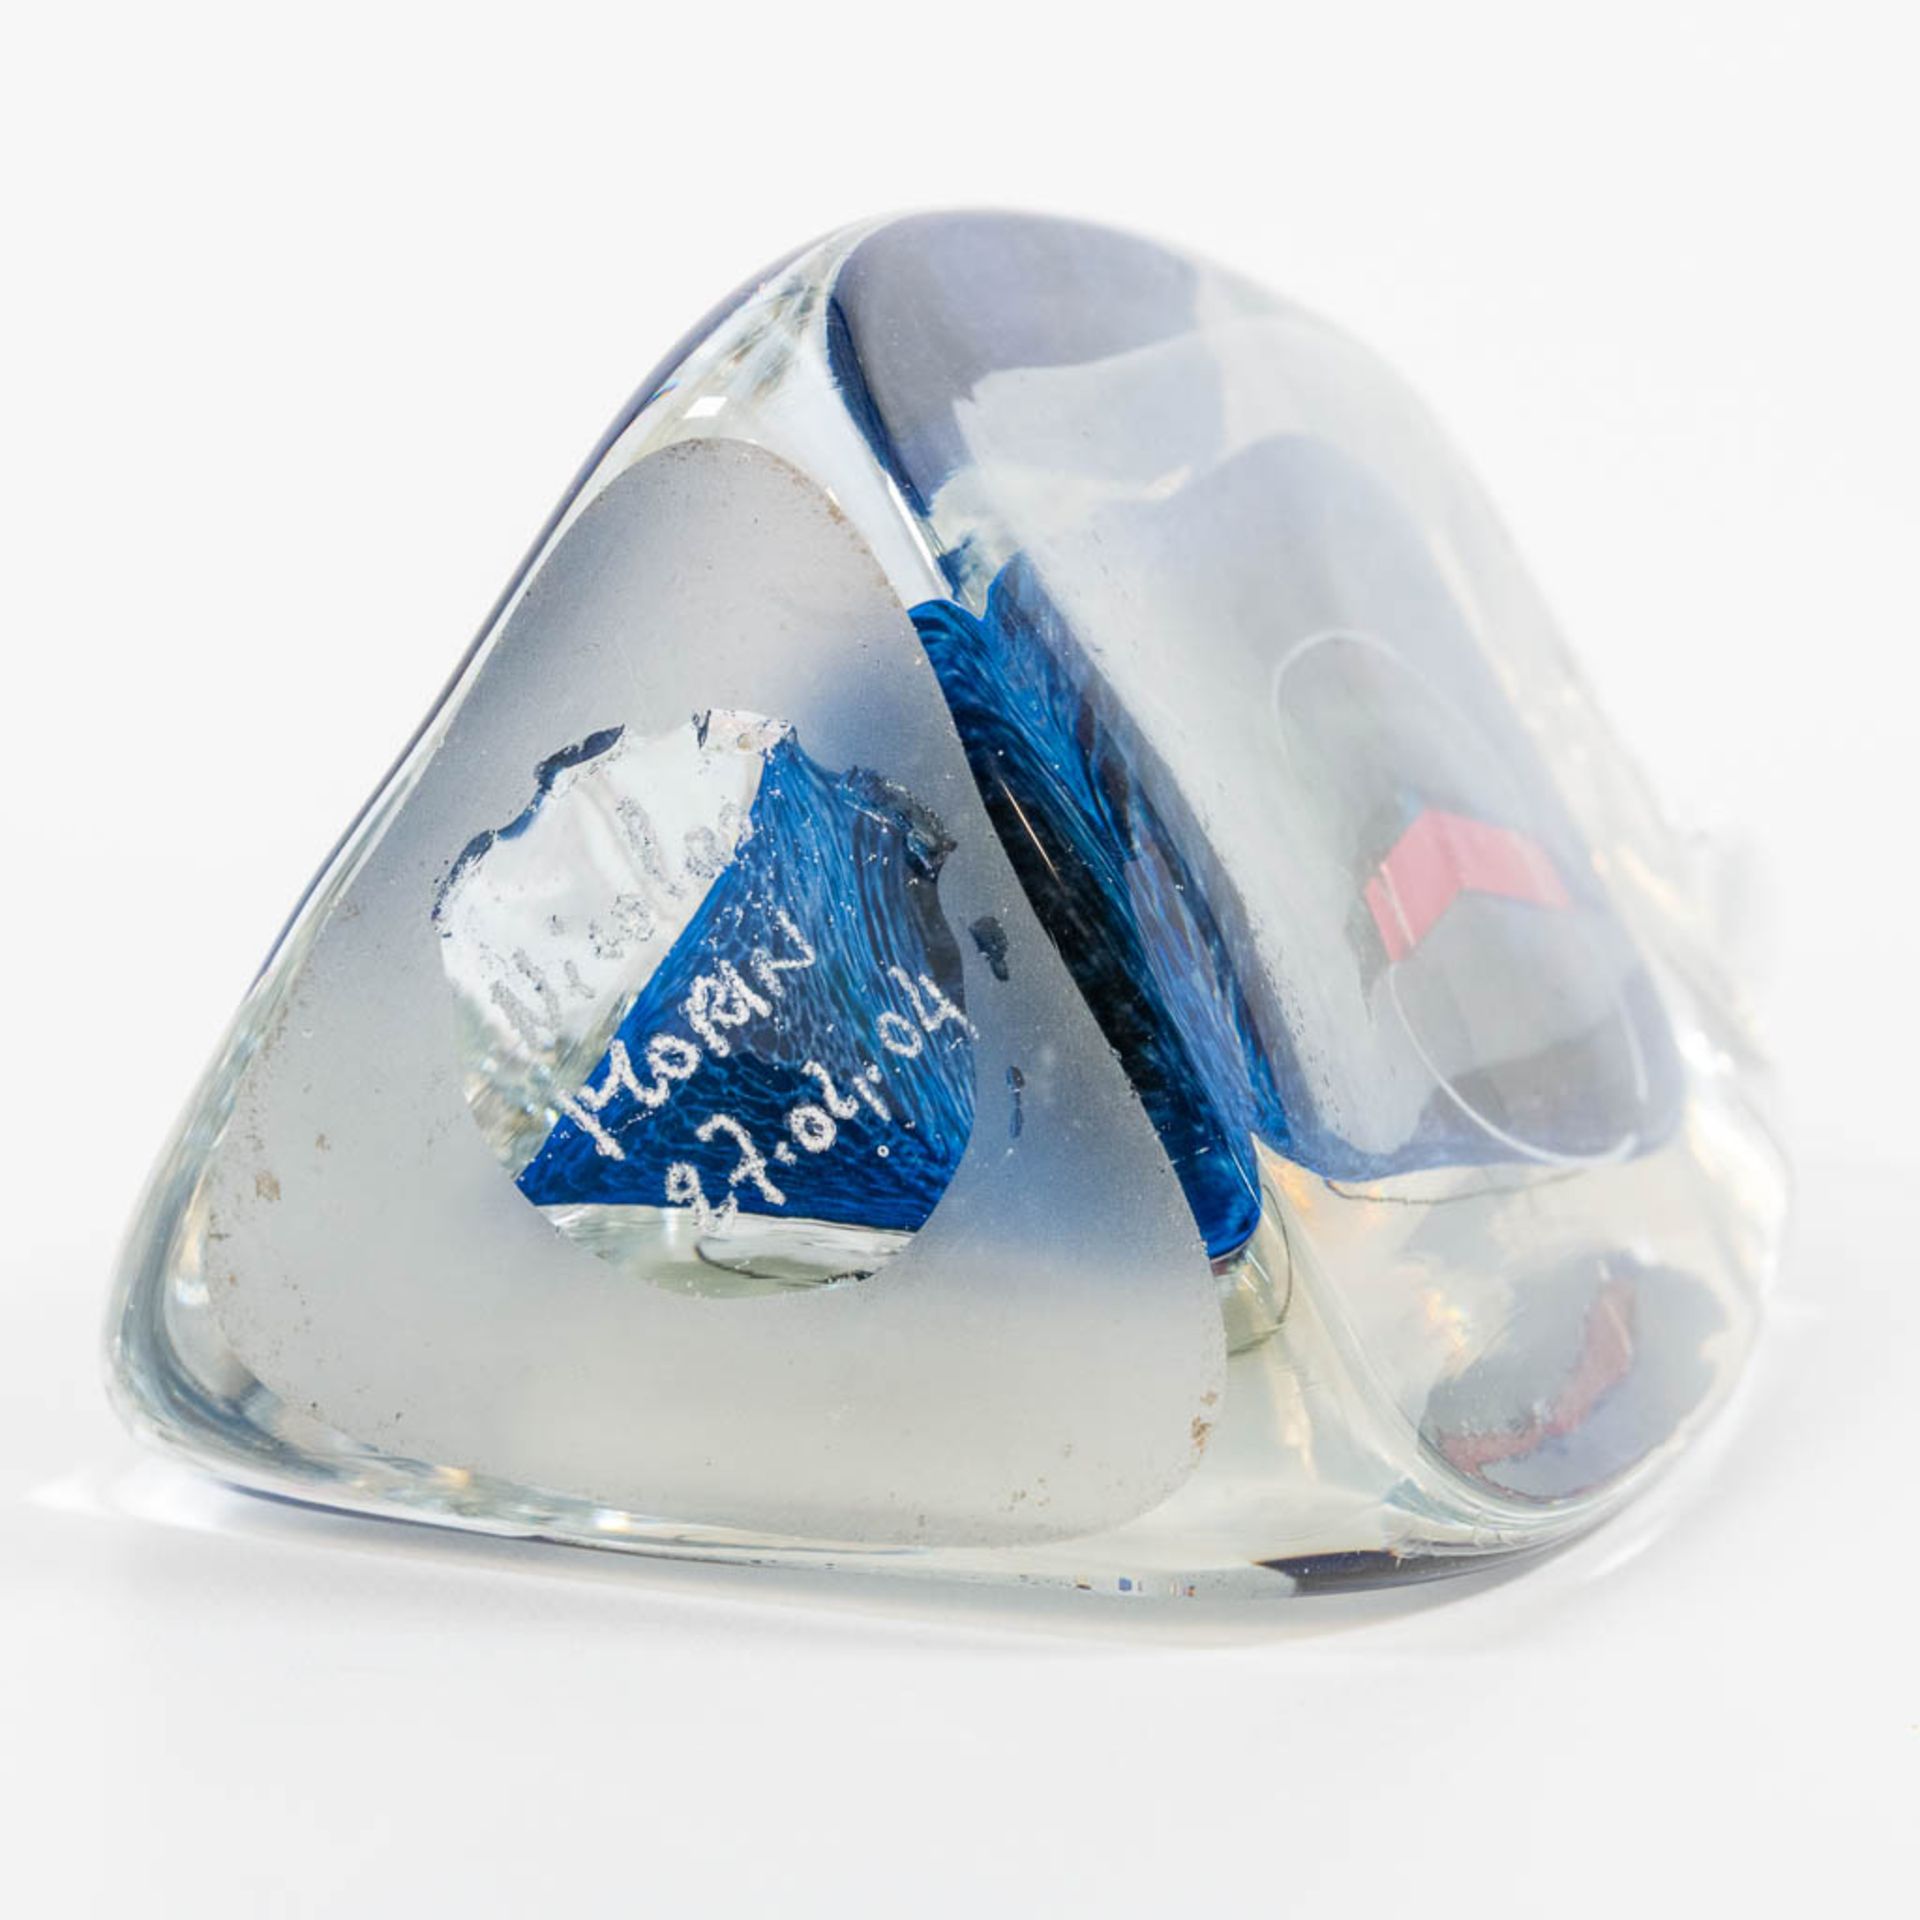 Nicolas MORIN (1959) A studio glass vase with stopper, marked on the base 2004. (9 x 10 x 21,5 cm) - Image 9 of 12